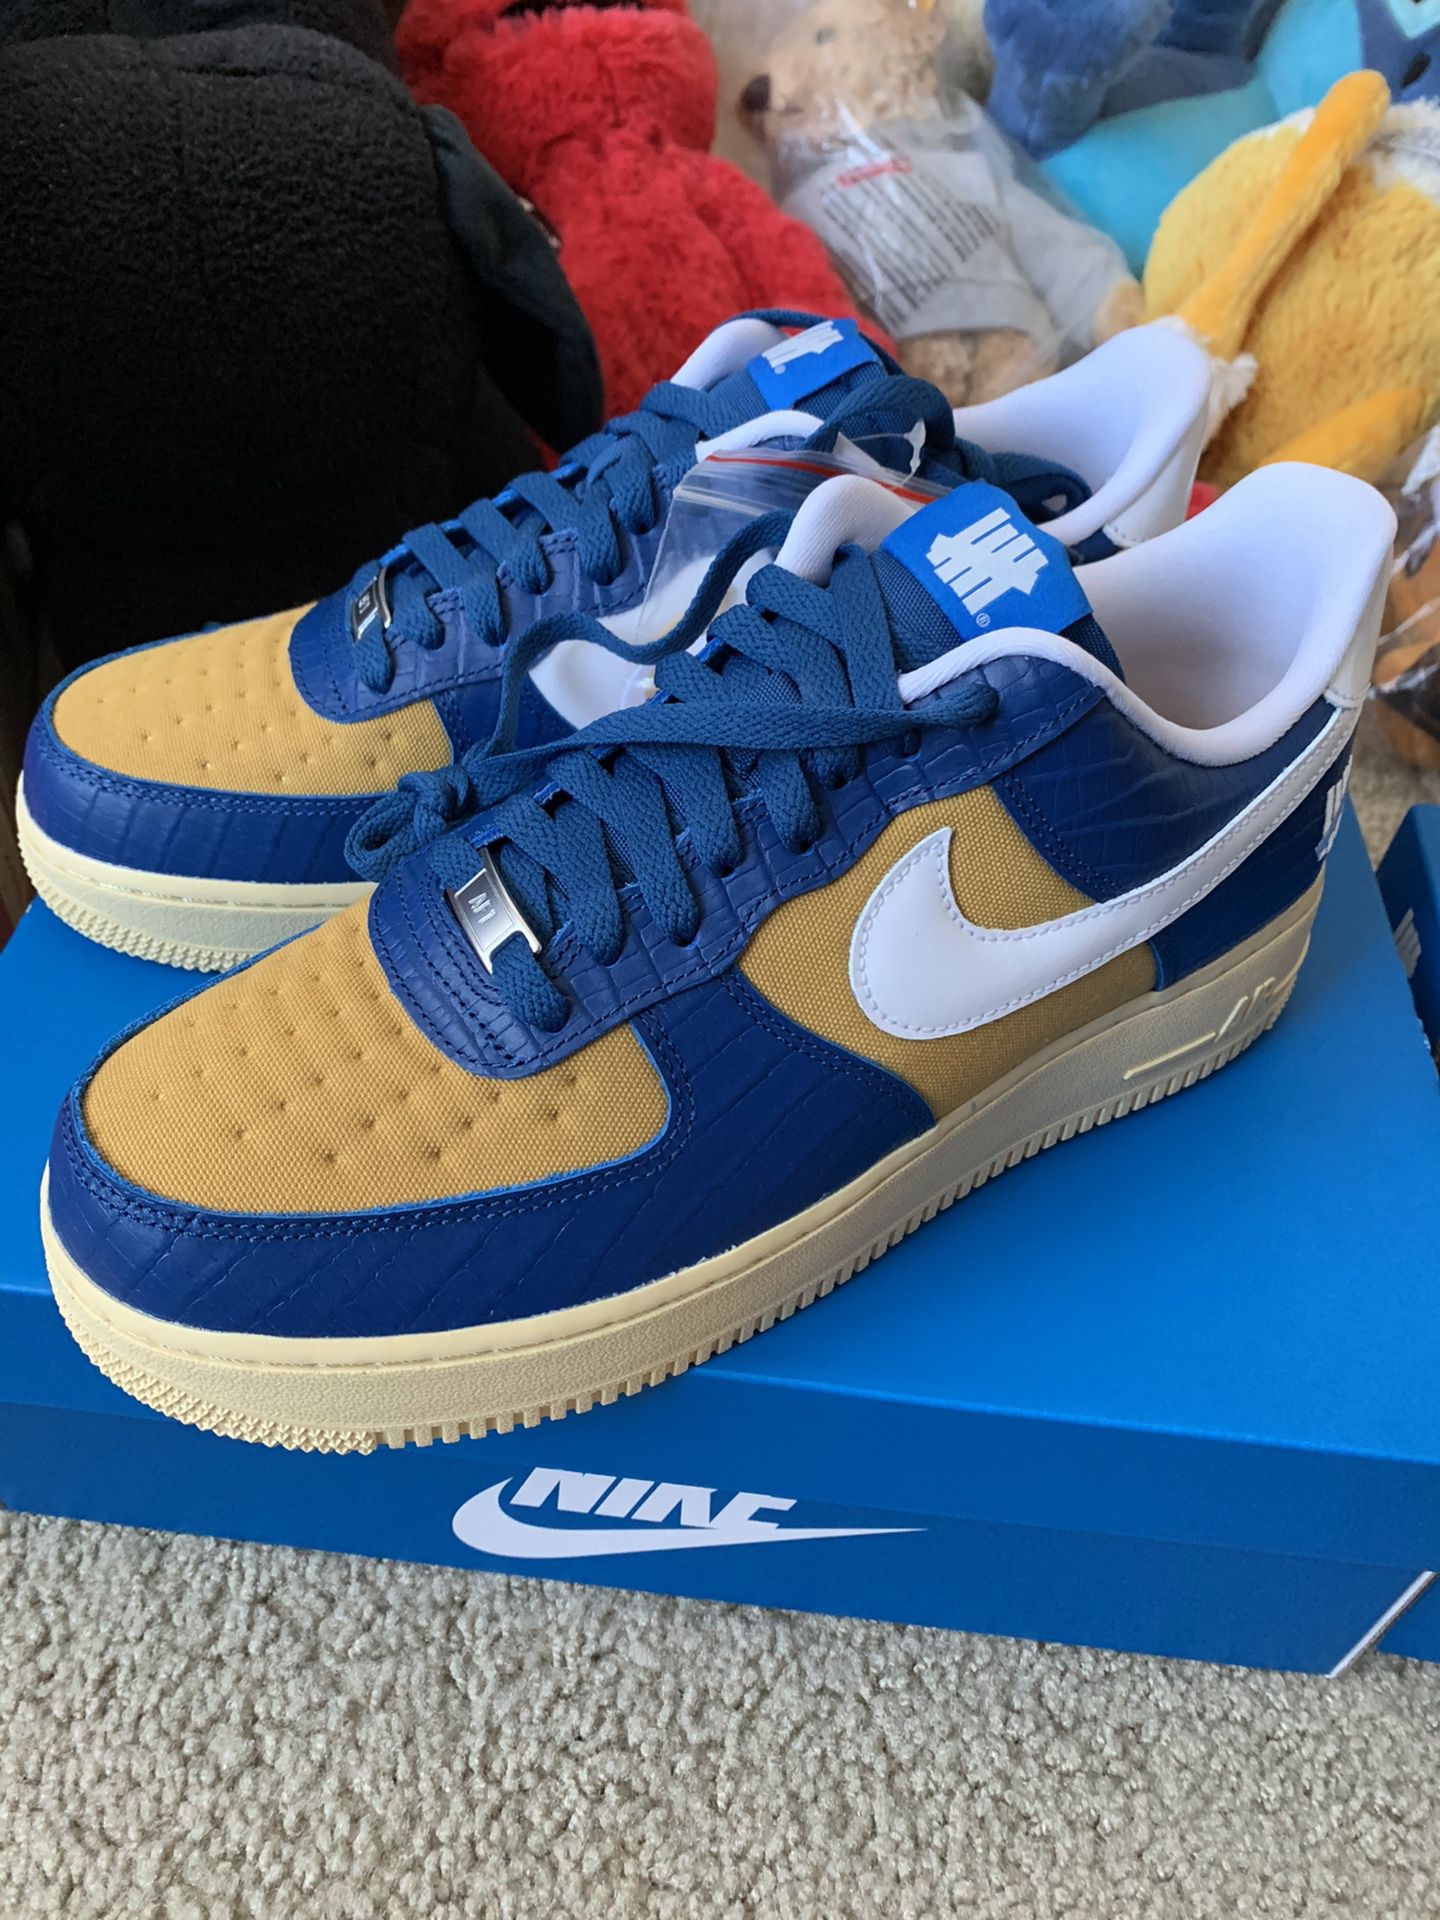 Undefeated AF1 5 on it blue Size 9